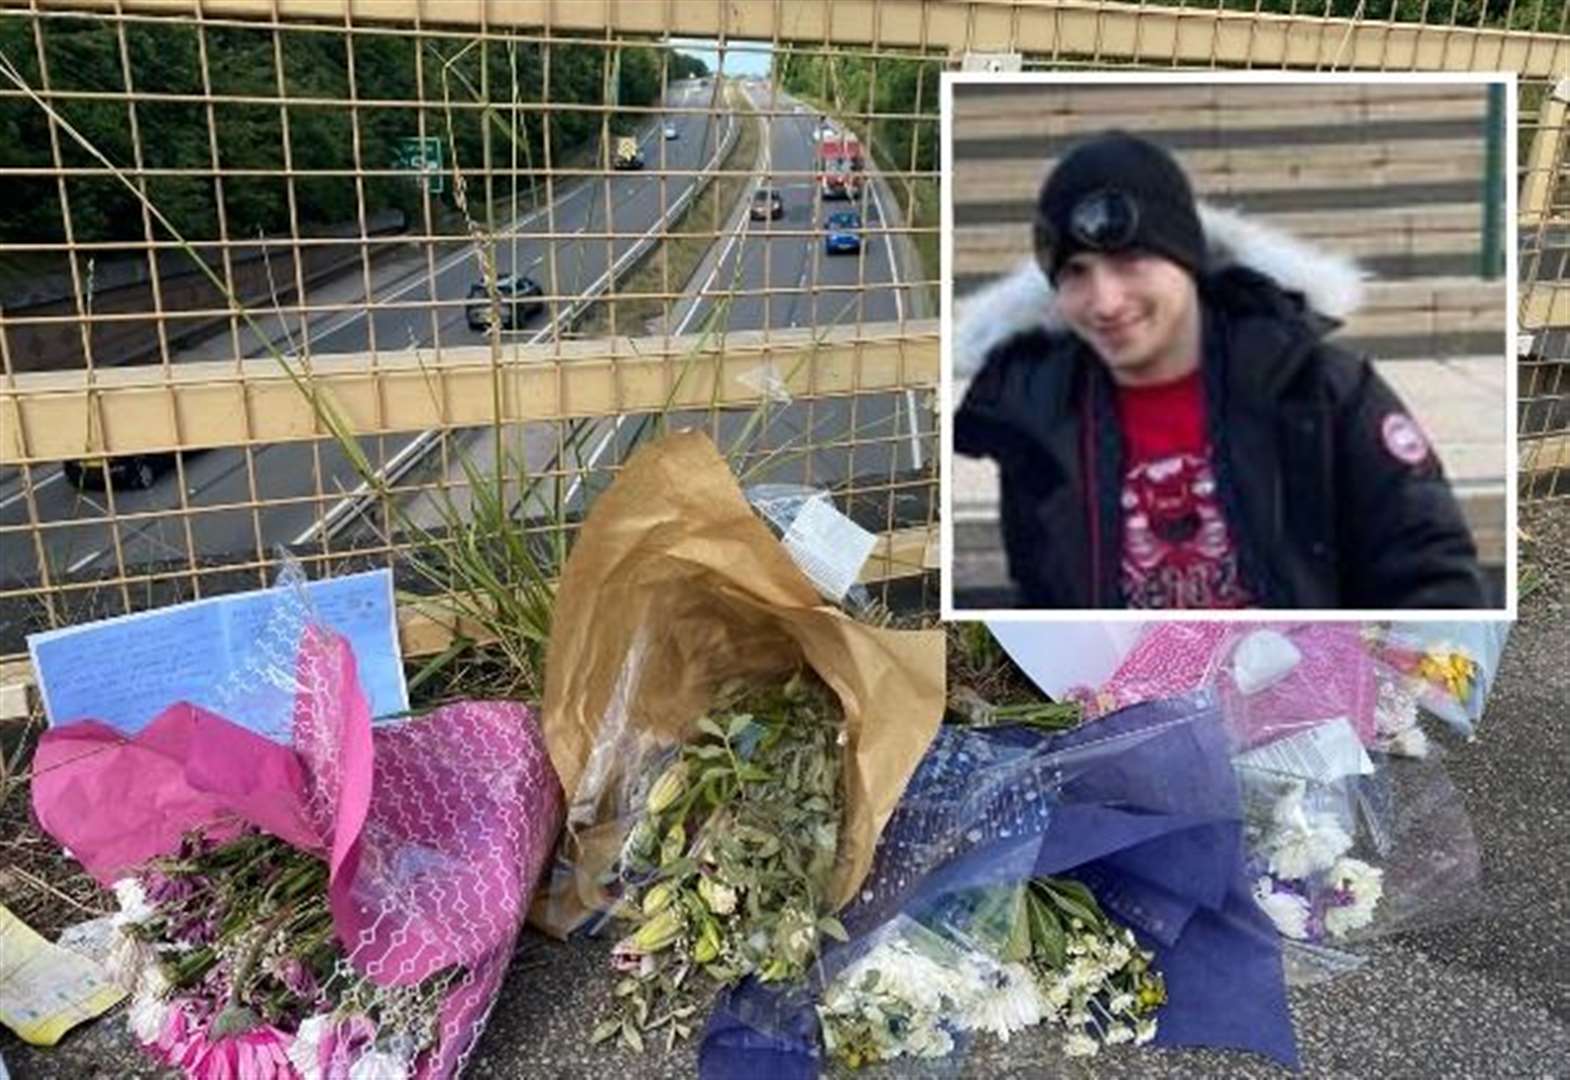 Tributes to young father after A249 bridge fall 